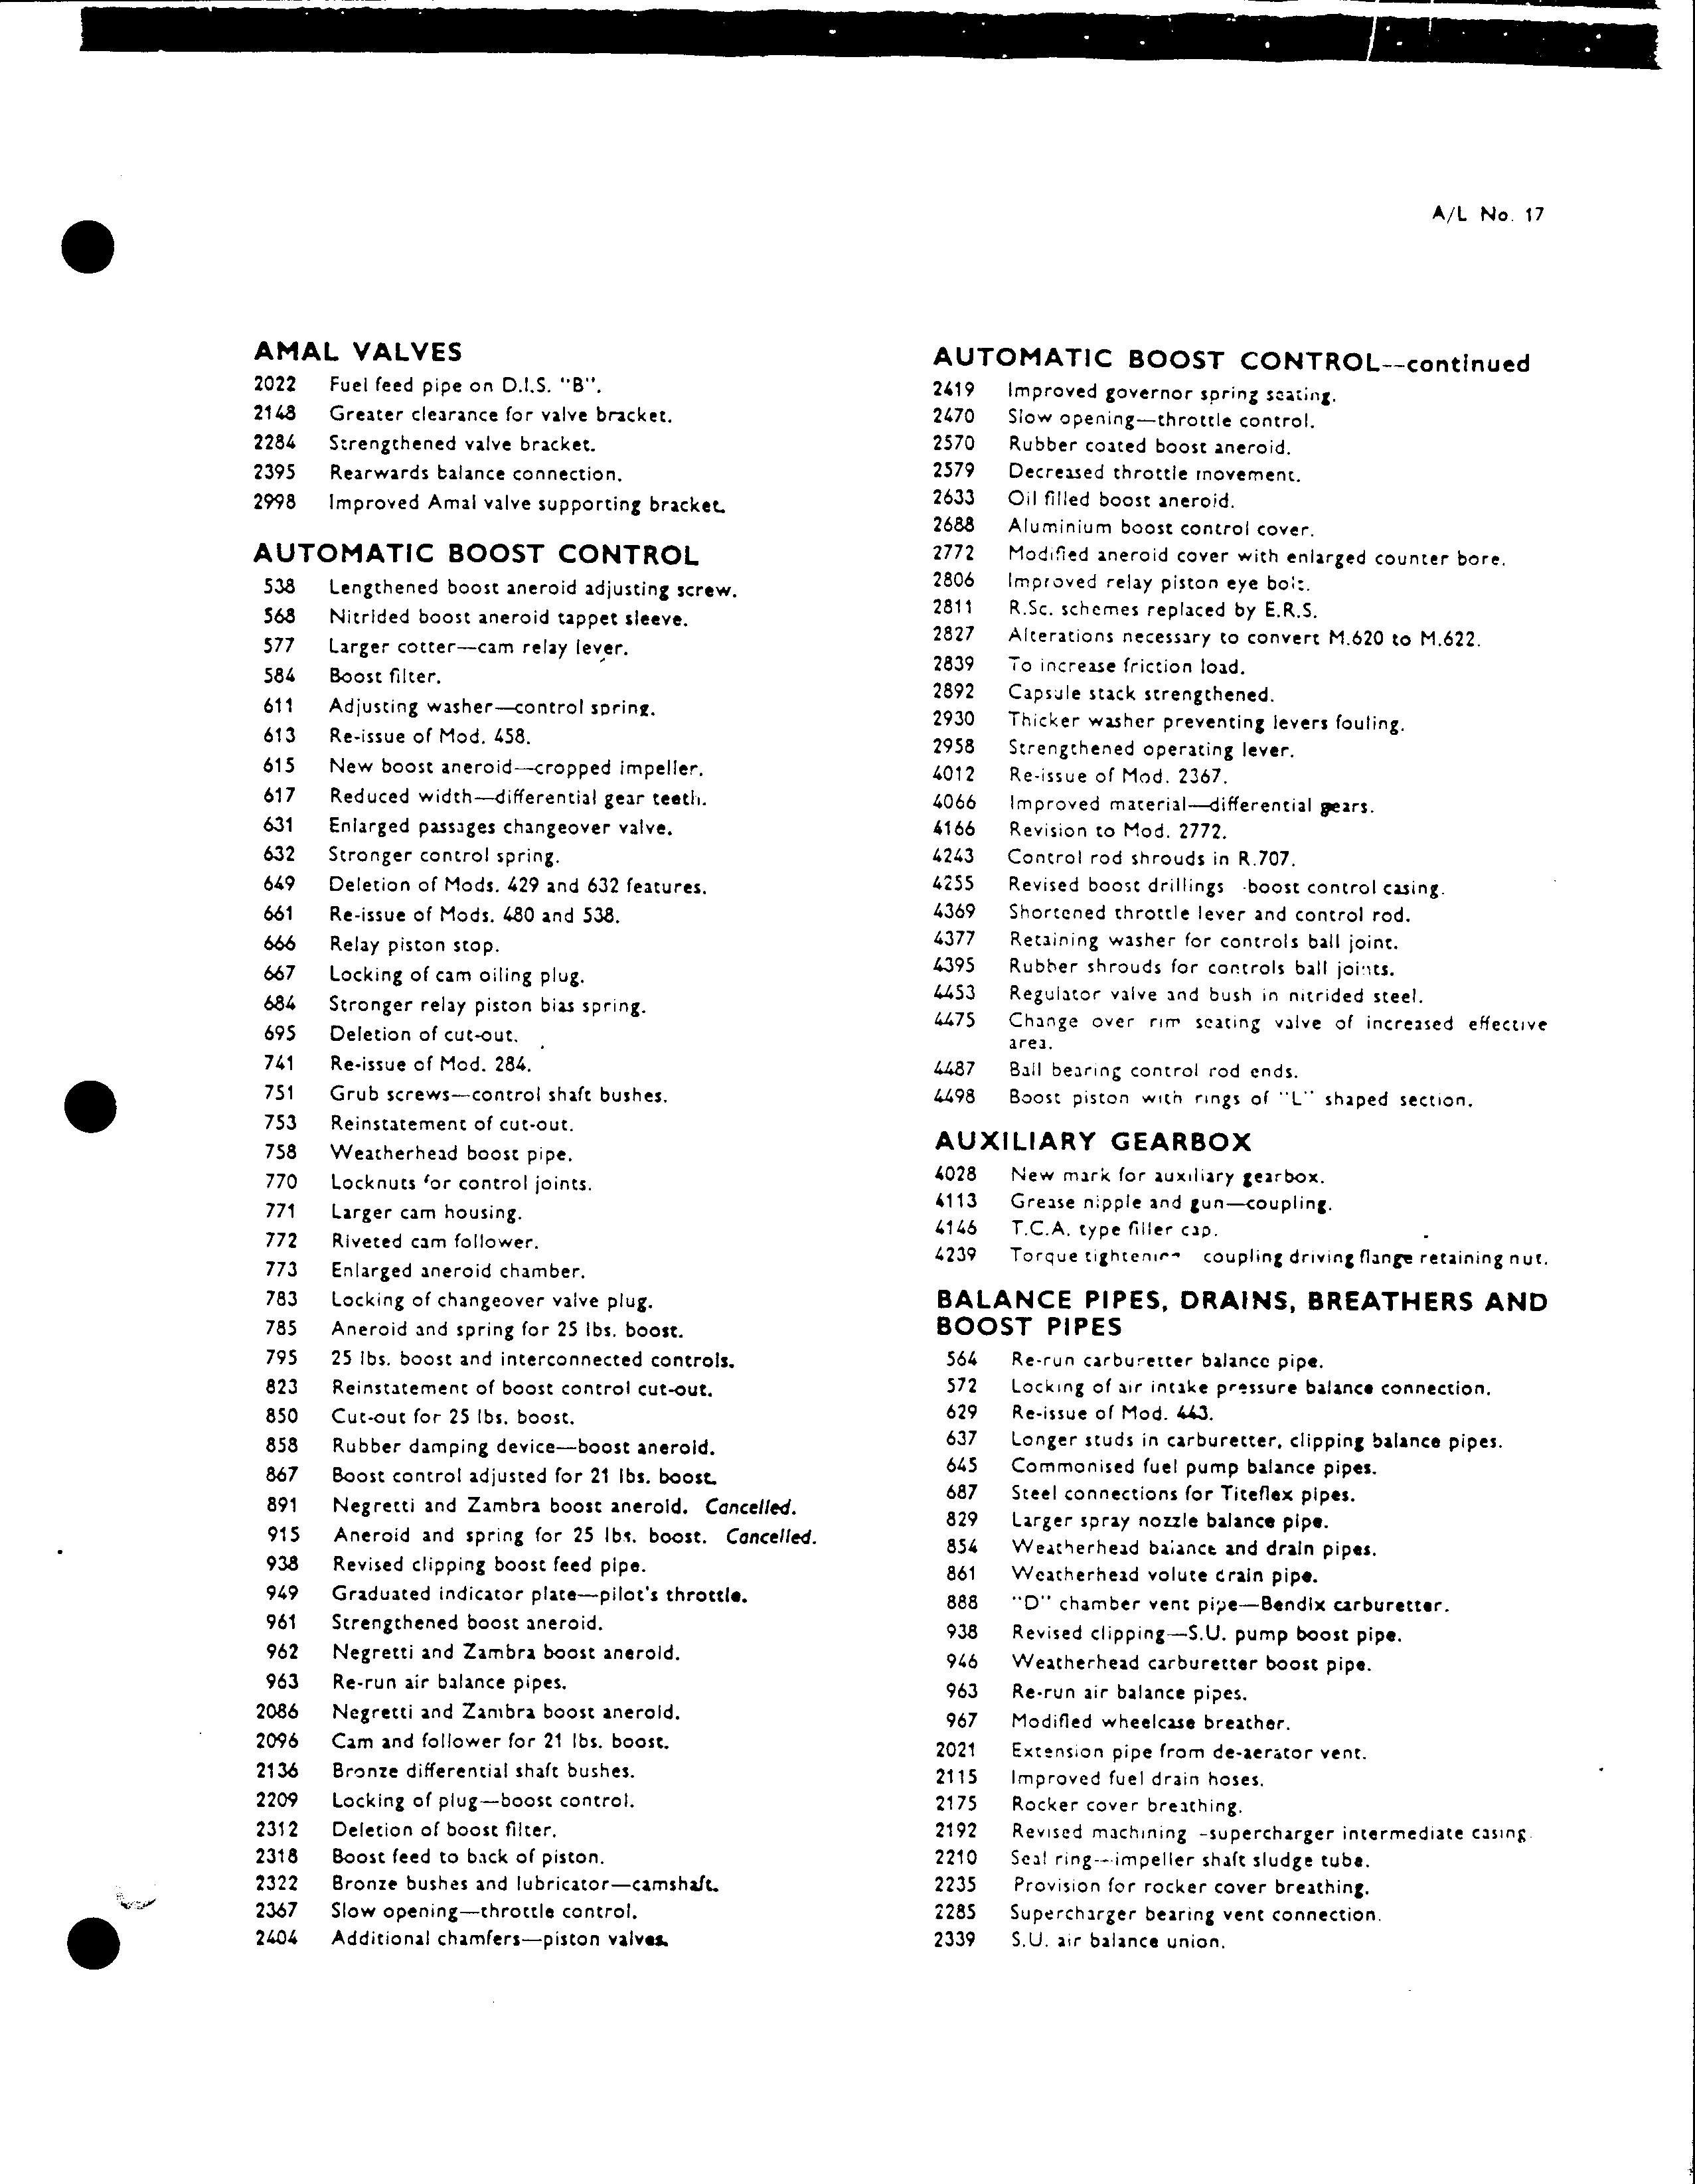 Sample page 13 from AirCorps Library document: Numerical List of Modifications to Rolls Royce Merlin Engines